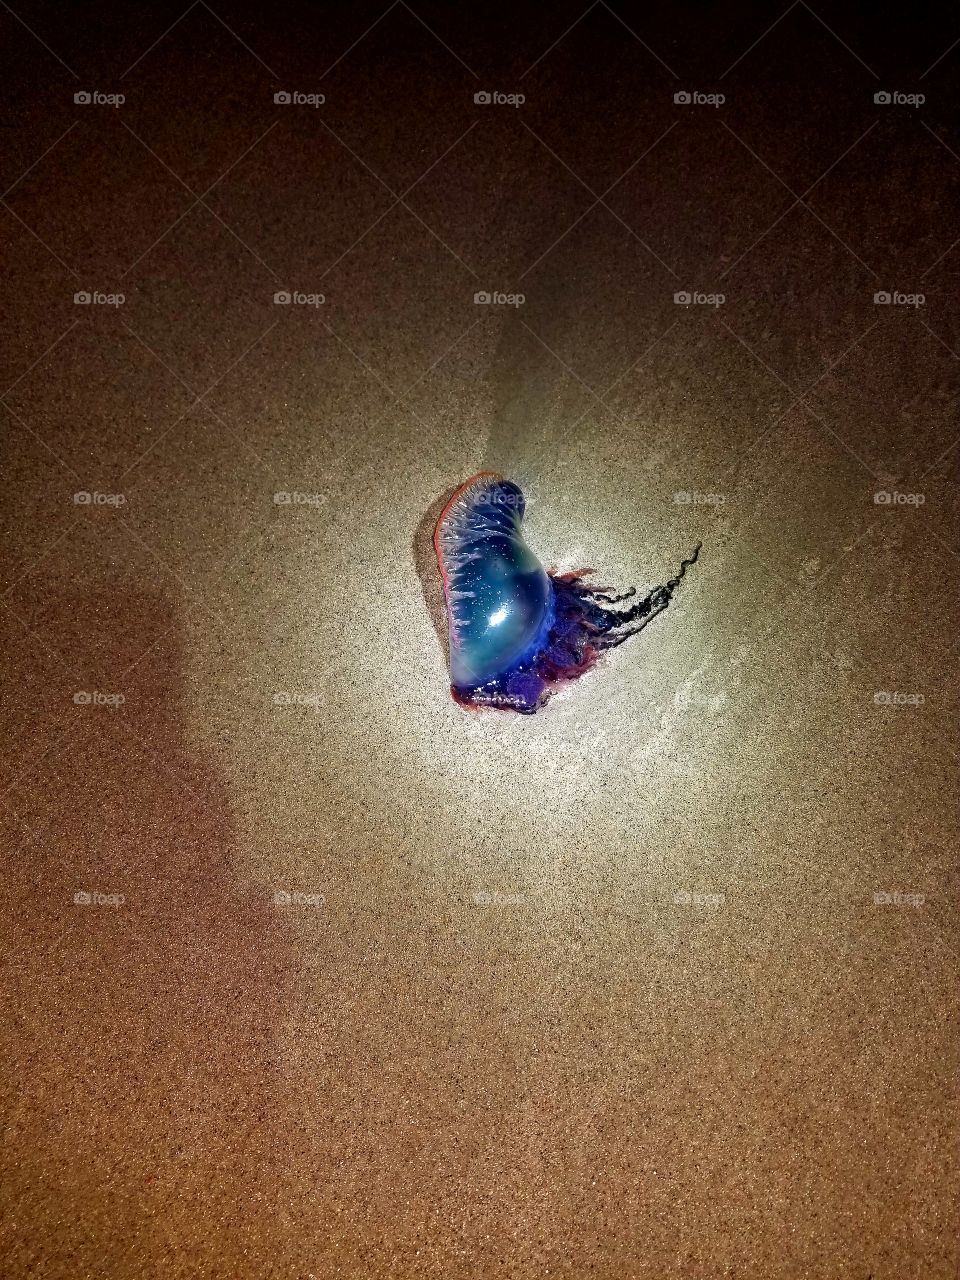 Washed up Portuguese Man of War Jellyfish